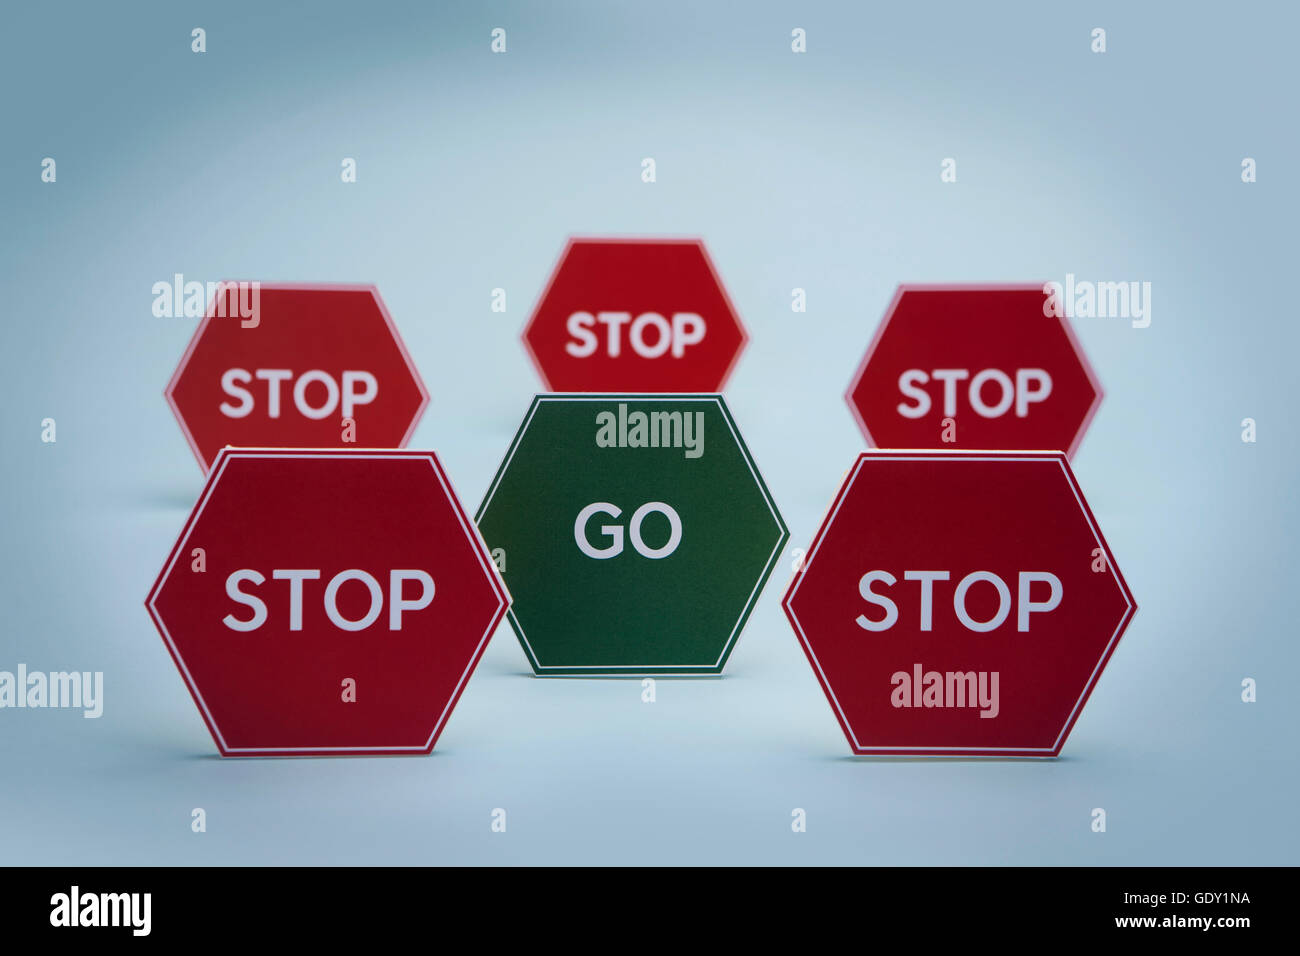 stop and go signs printable